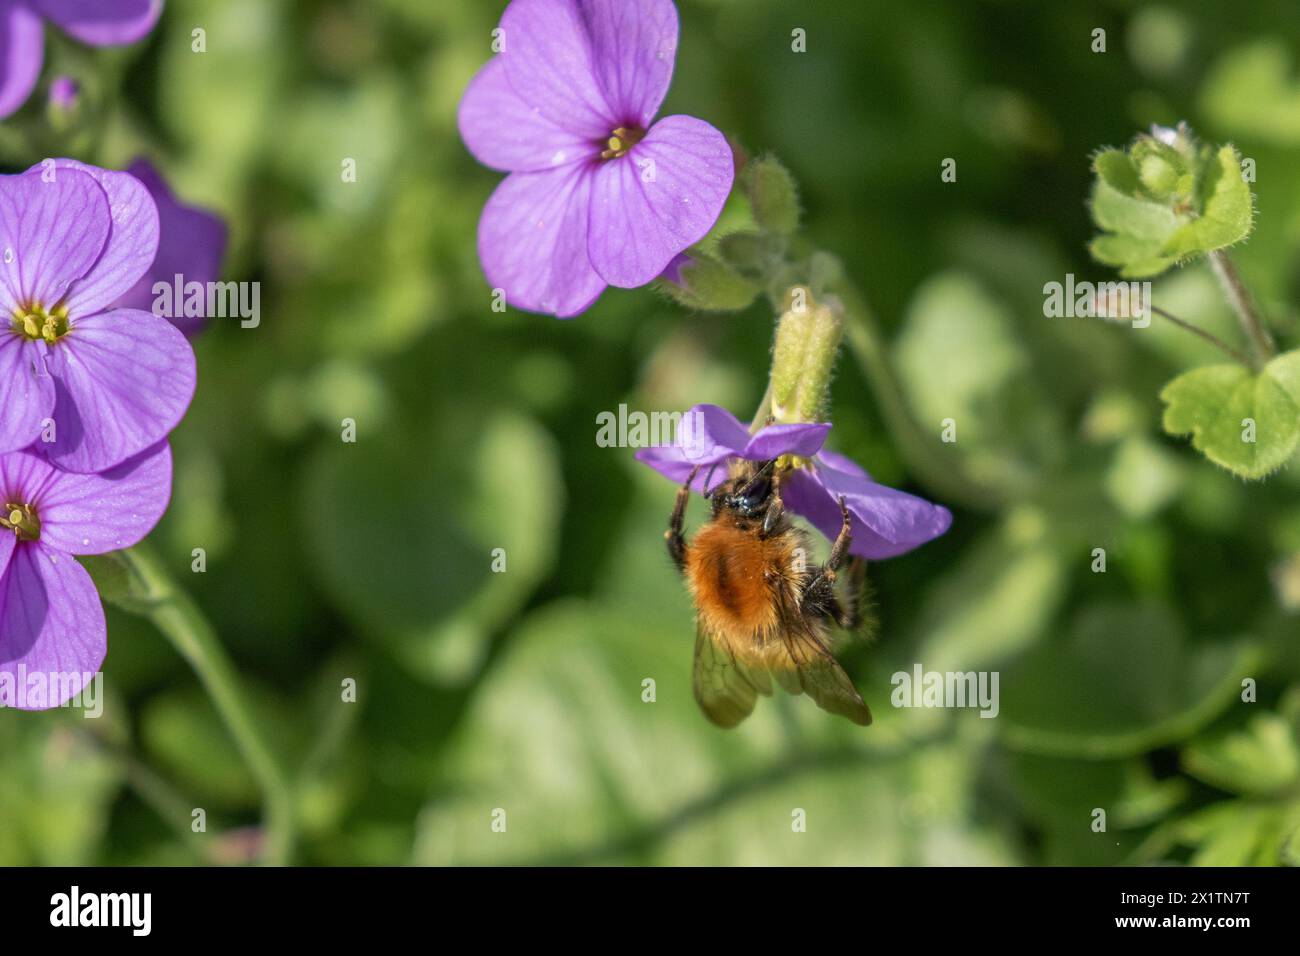 A carder bee (Bombus pascuorum) feeding on purple aubretia flowers in a Yorkshire garden. Stock Photo